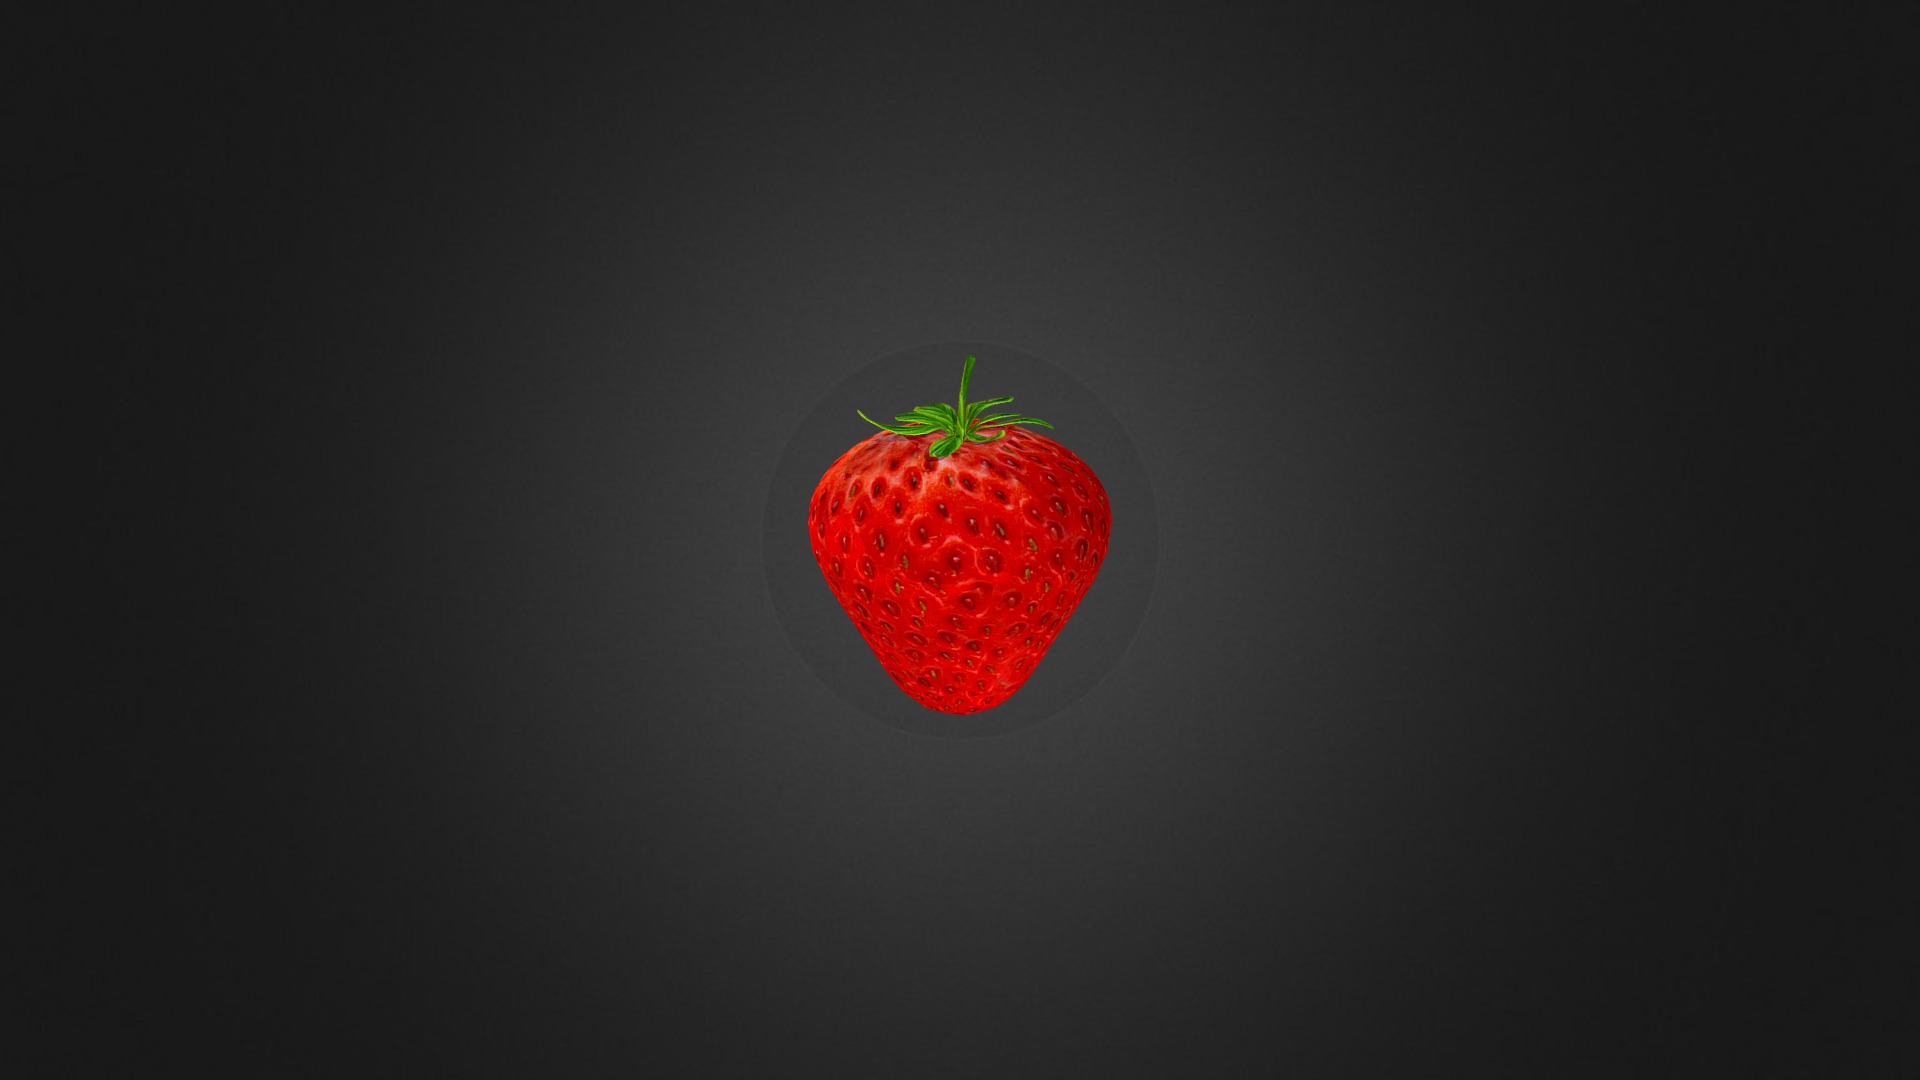 3D model Strawberry - This is a 3D model of the Strawberry. The 3D model is about a red strawberry with green stems.